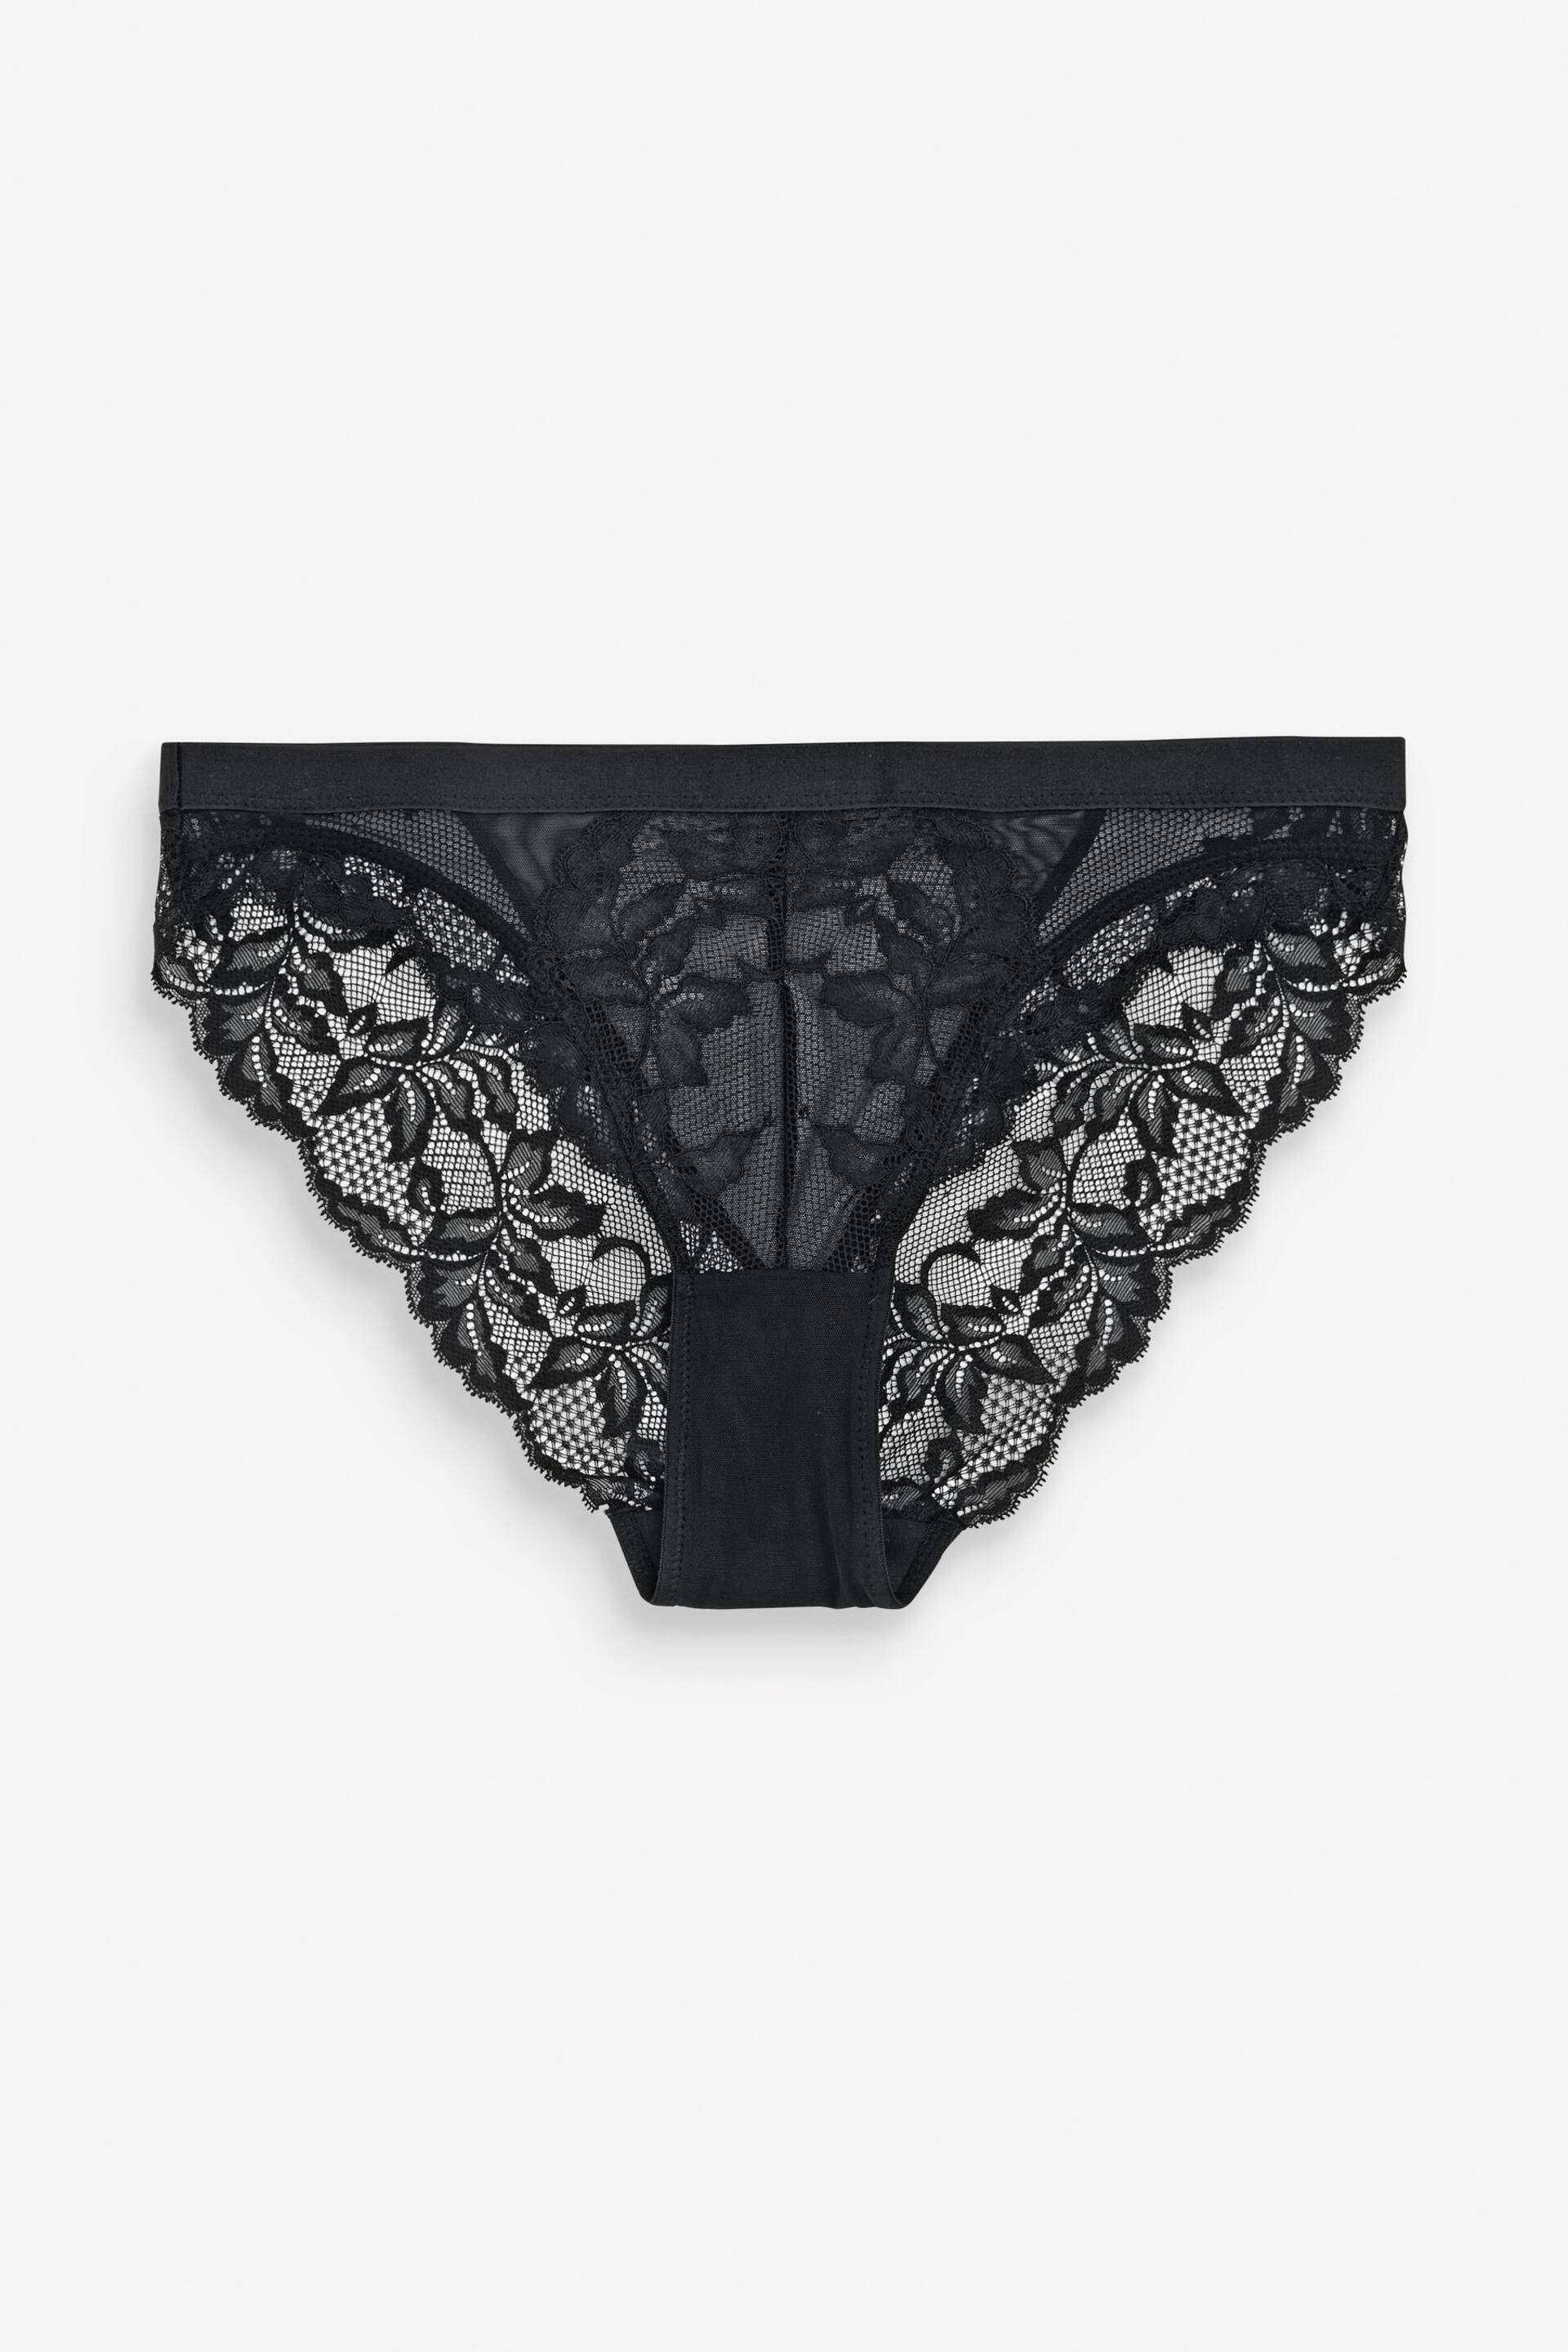 Black/White High Leg Lace Knickers 2 Pack - Image 6 of 7